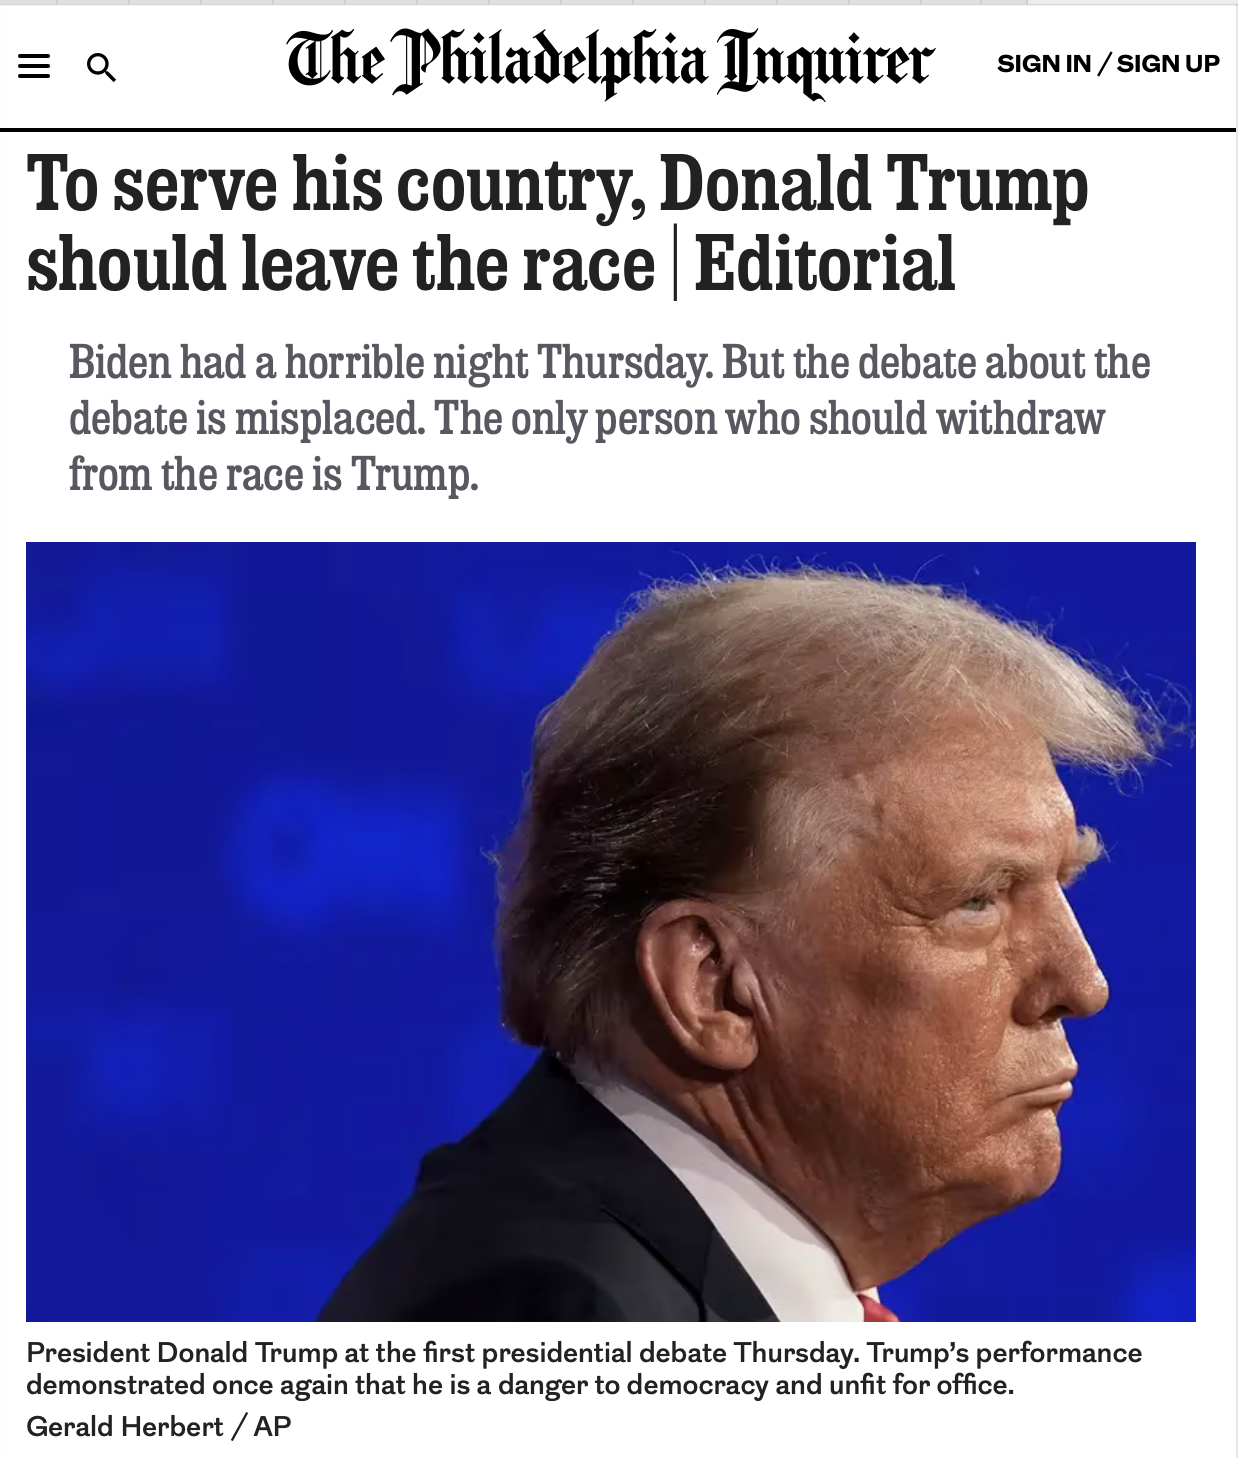 Donald Trump should leave the race- Inquirer